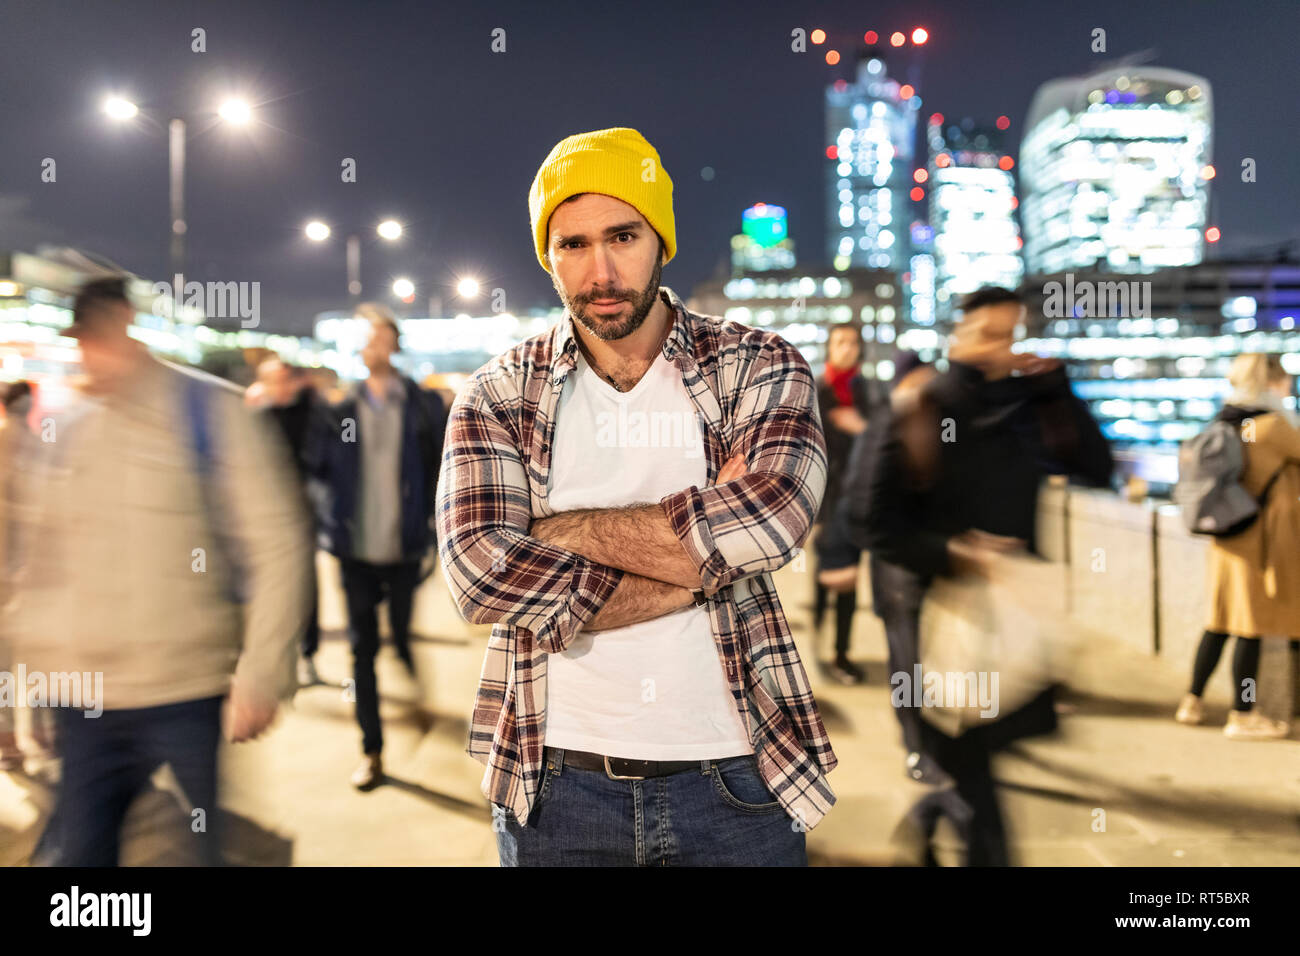 UK, London, portrait of a commuter by night with blurred people passing nearby Stock Photo